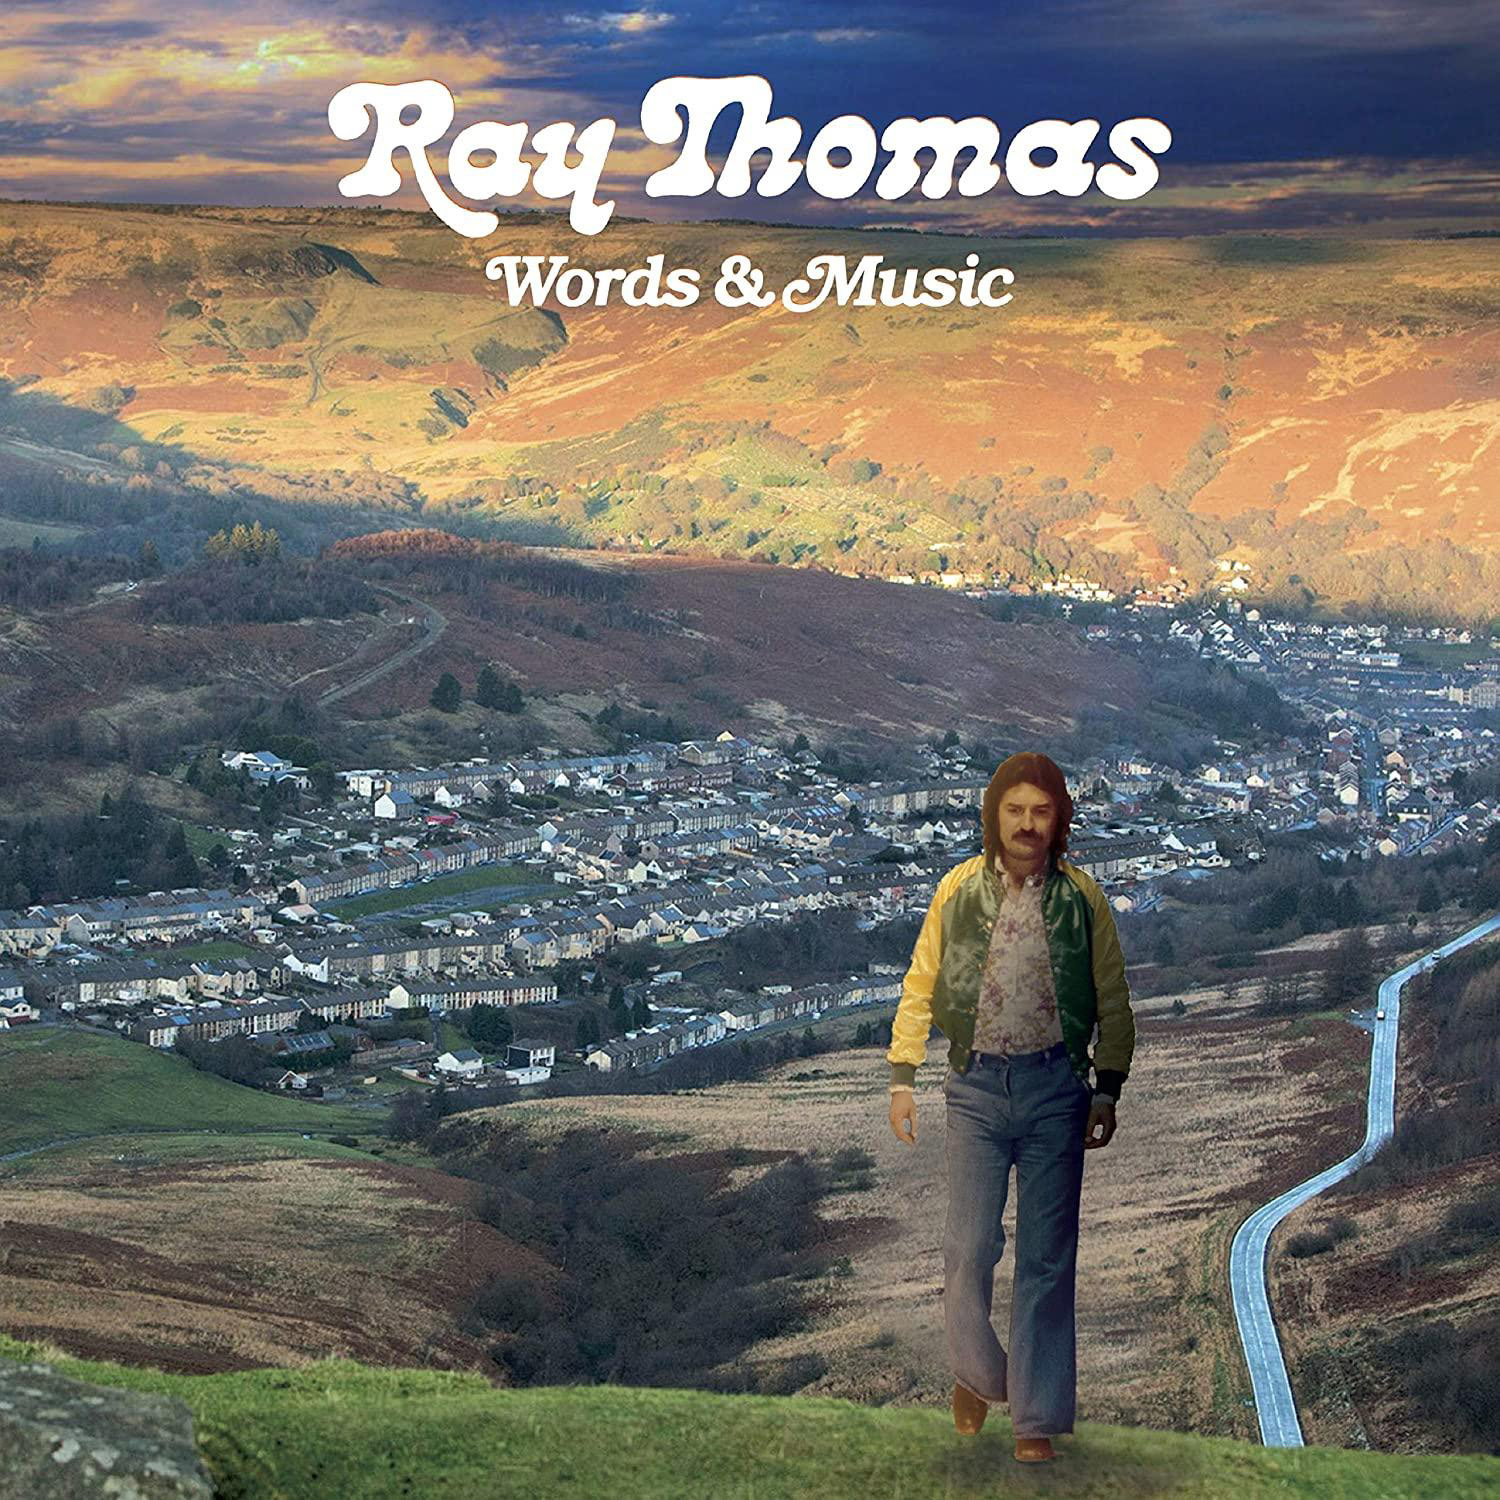 Words Thomas + - Video) - (CD Co Ray Newly Remastered DVD And 2 Music: (CD/DVD) Disc